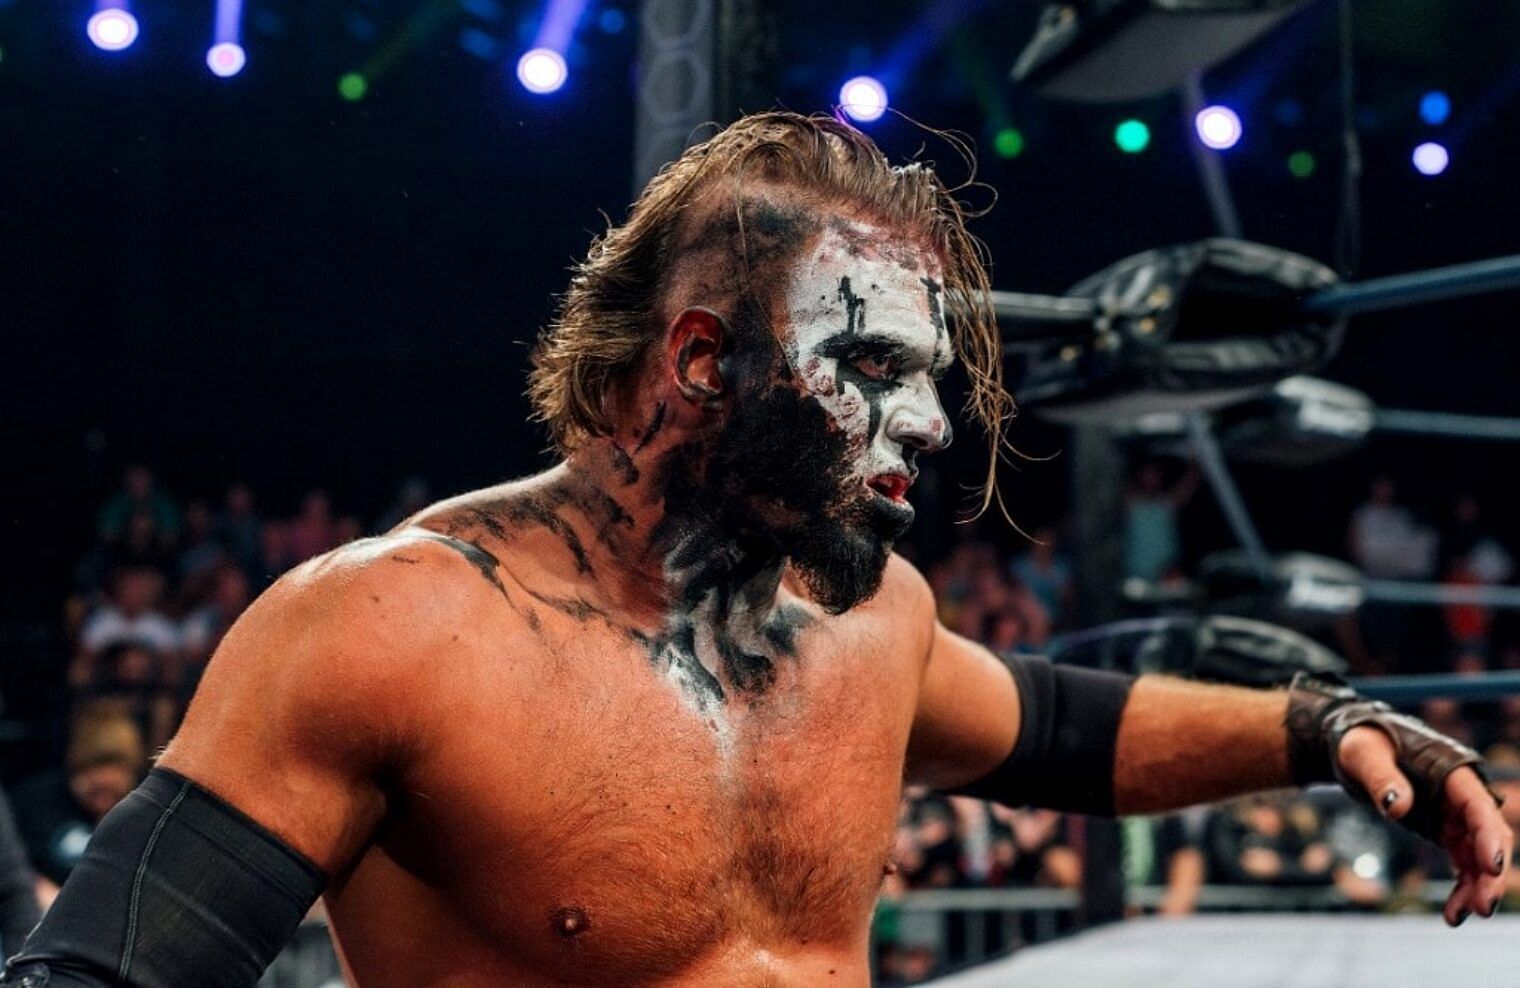 Crazzy Steve has been an important member of Decay.